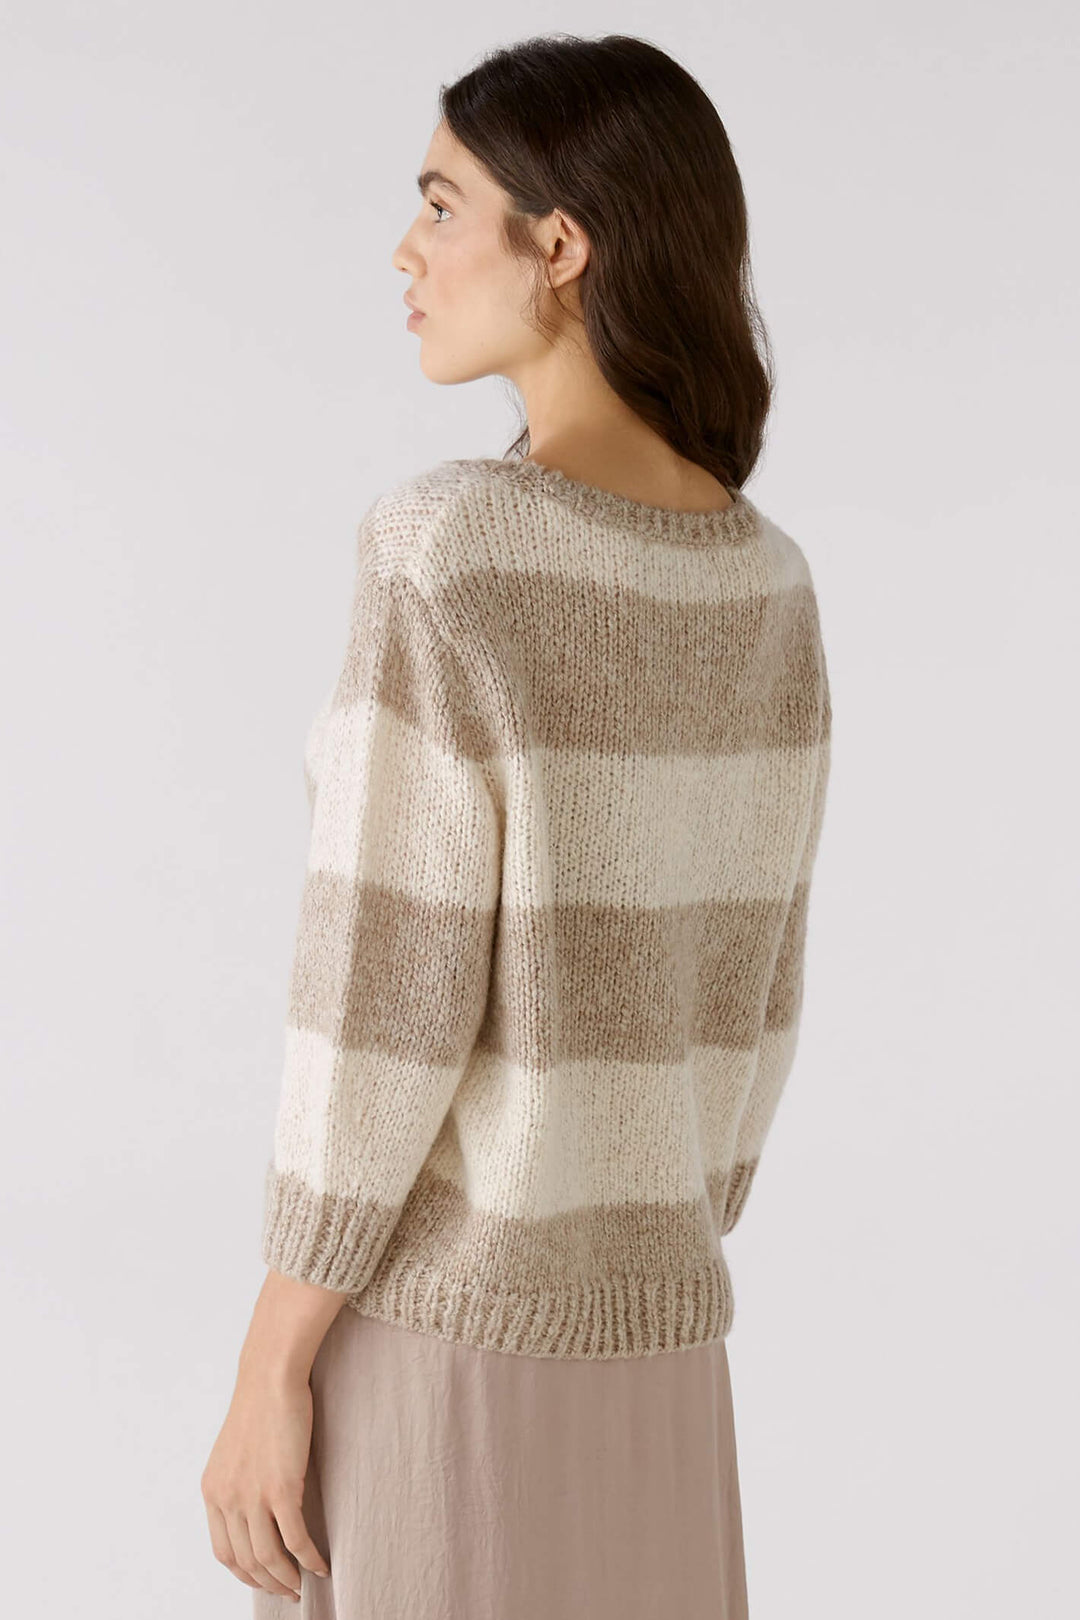 Oui 79633 Light Brown Stone Stripe Chunky Knit Round Neck Jumper - Shirley Allum Boutique